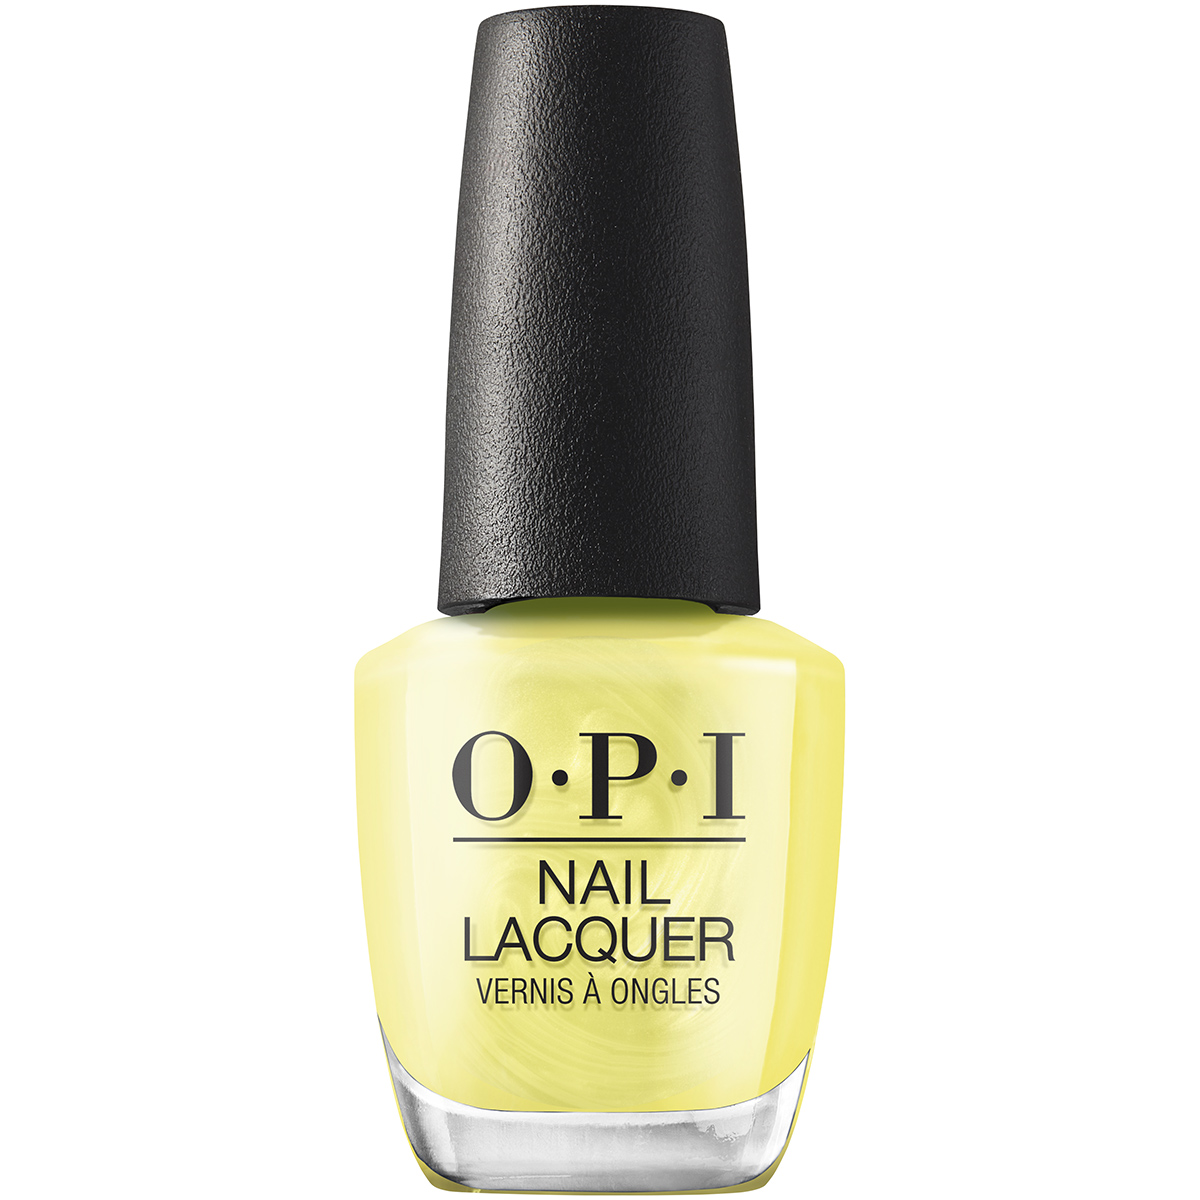 Lac de unghii Nail Lacquer Summer, Sunscreening my Calls, 15 ml, Opi